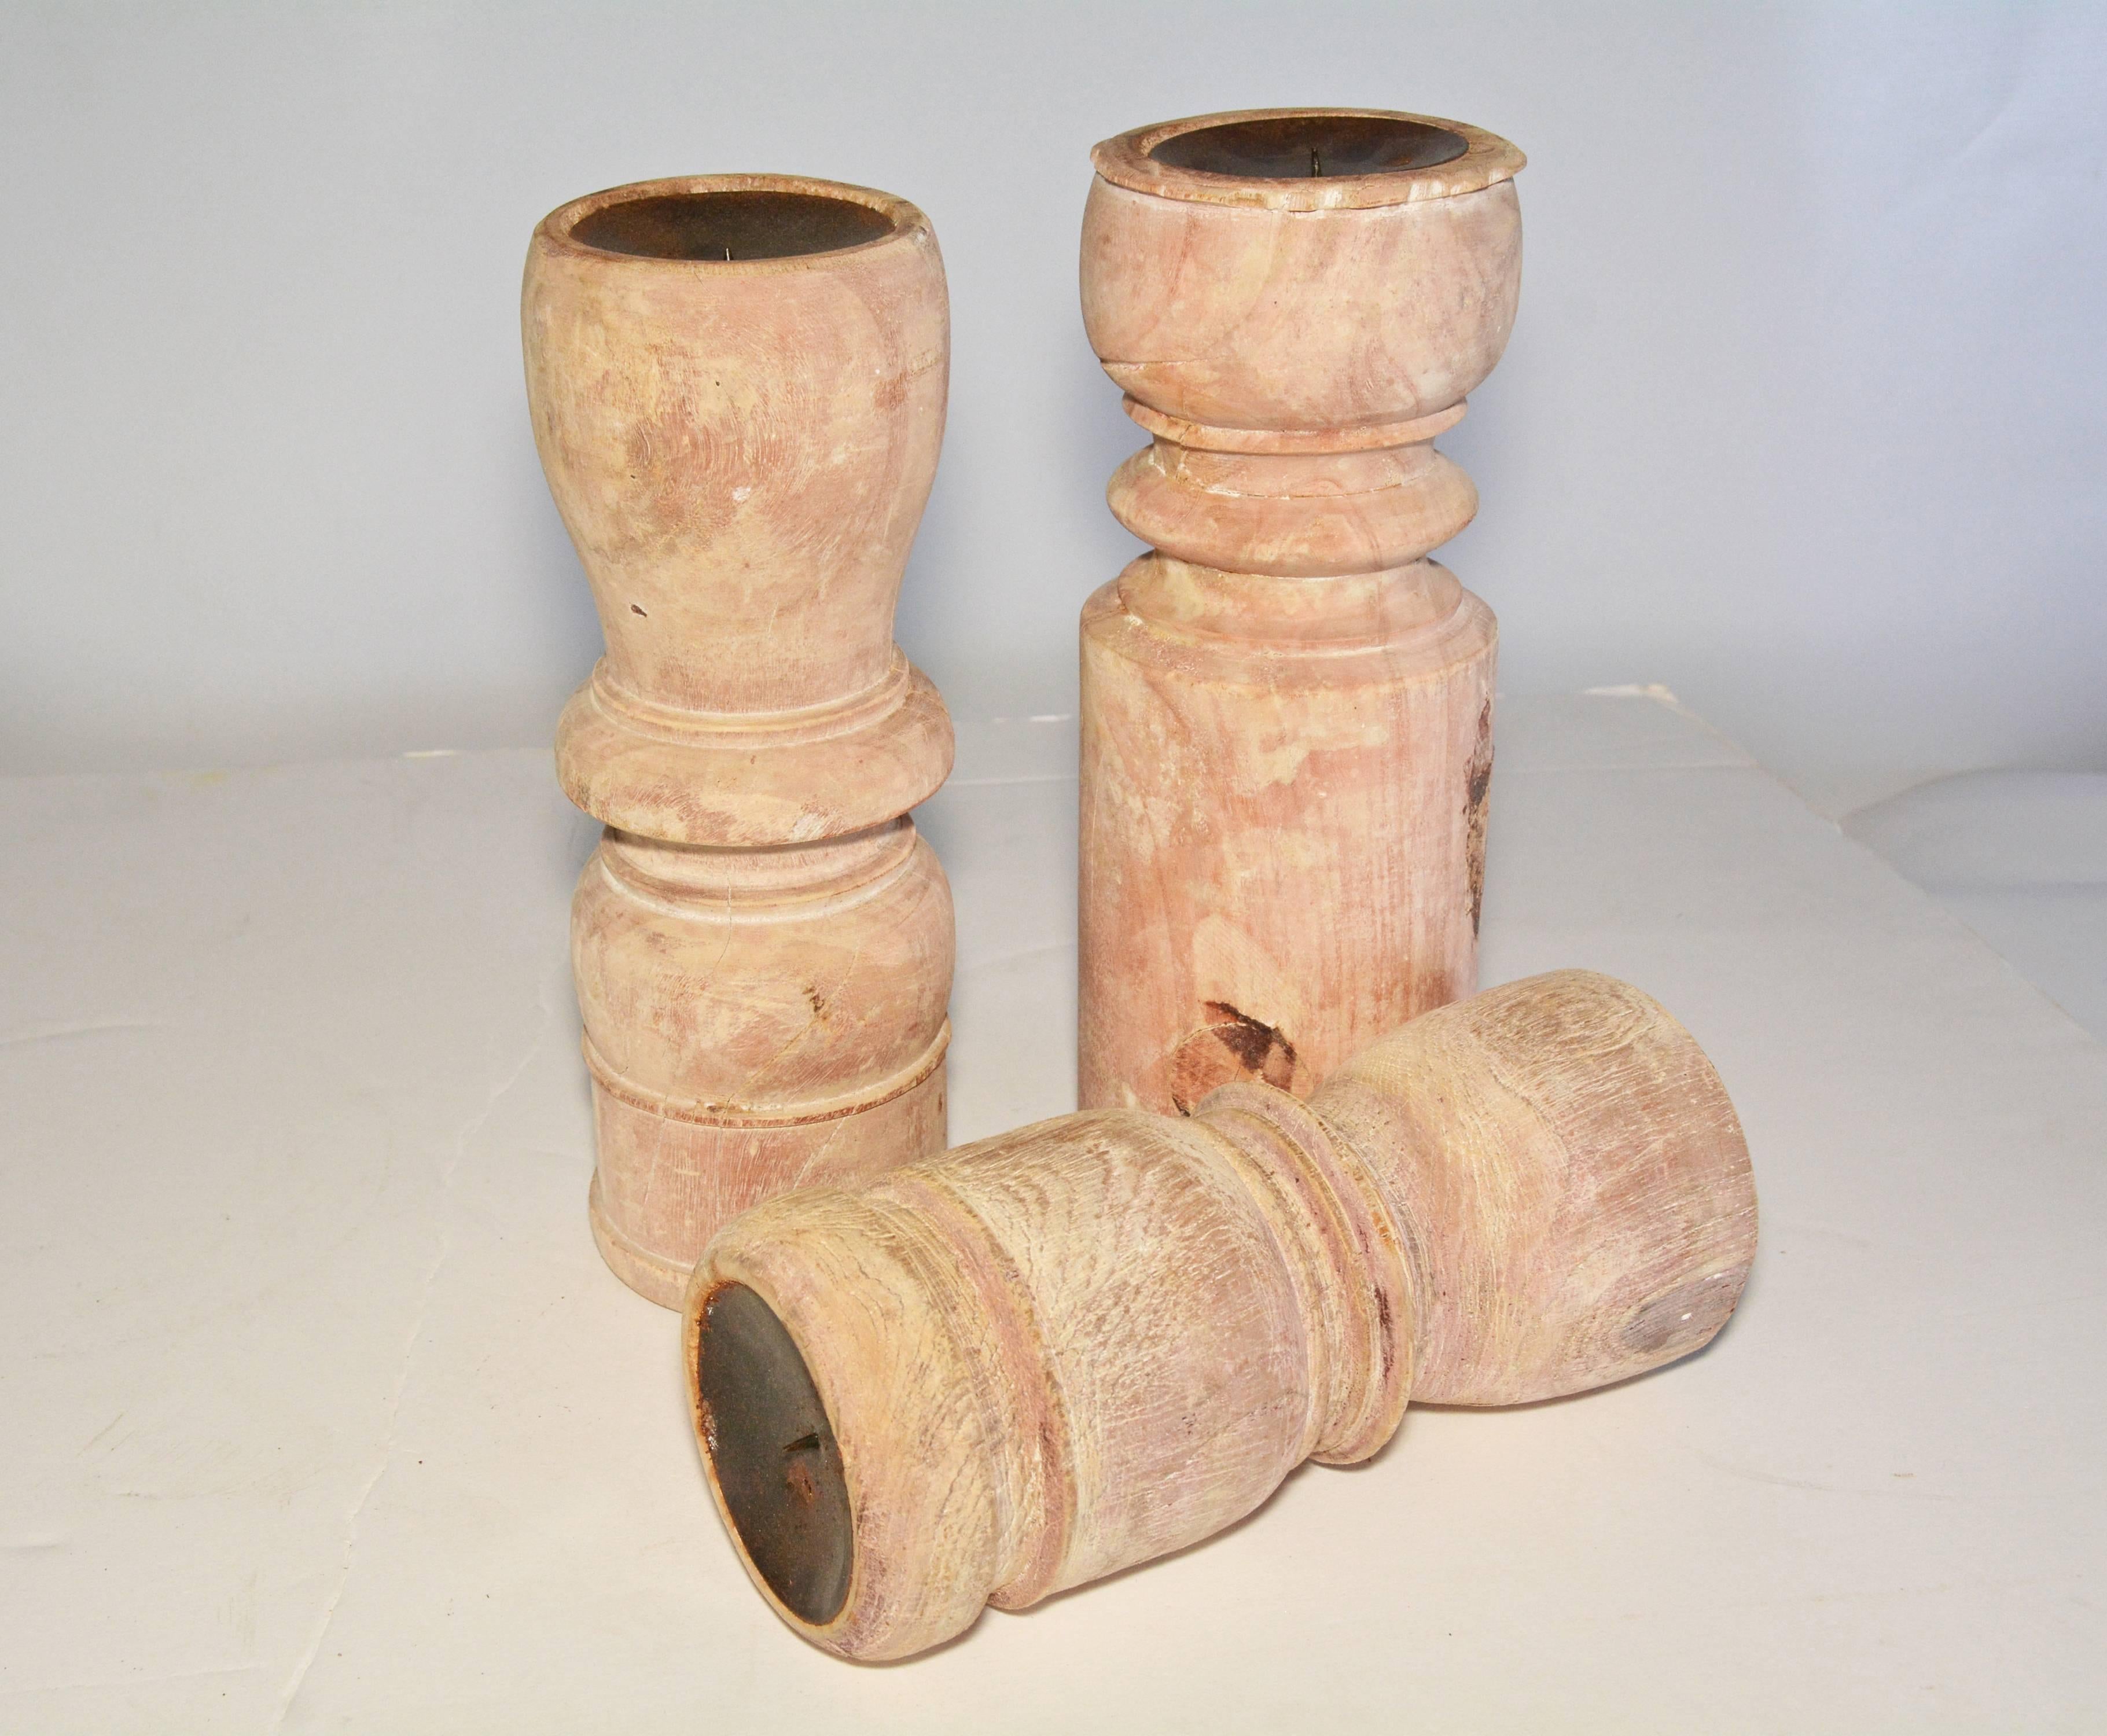 The rustic teak candlesticks of three varying heights have concave tops lined in metal with center spikes to hold flat pillar candles. Made from reclaimed antique architectural elements. Each one is unique.
Measures: Diameter 3.75